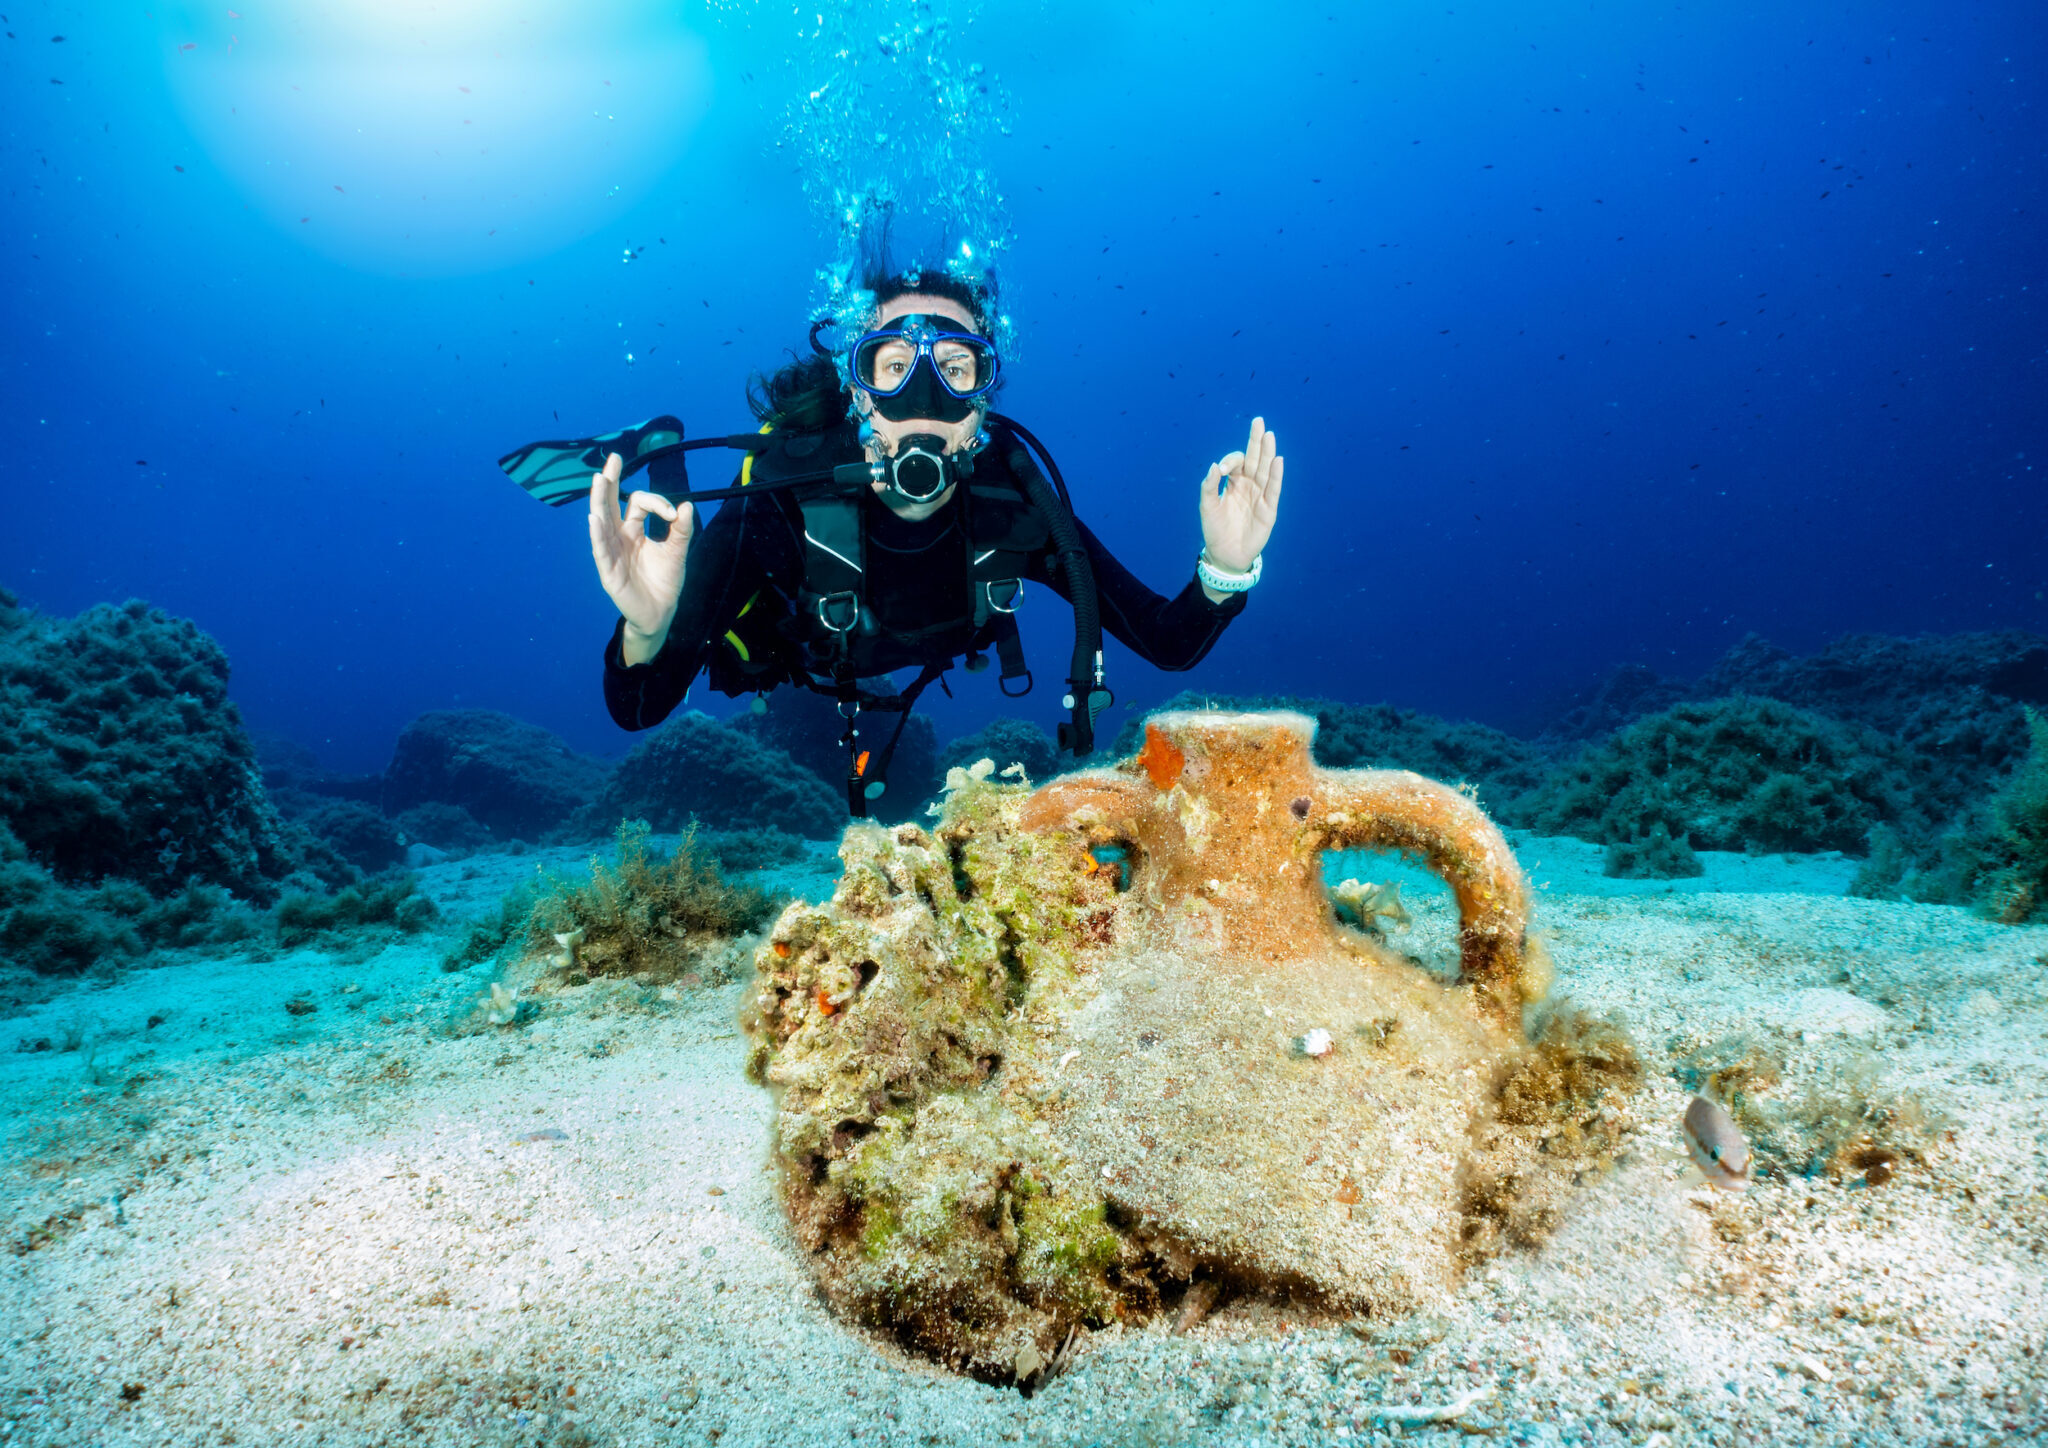 A diver looking at an ancient amphora and one of many attractions in Greece, one of the best places to get scuba certified